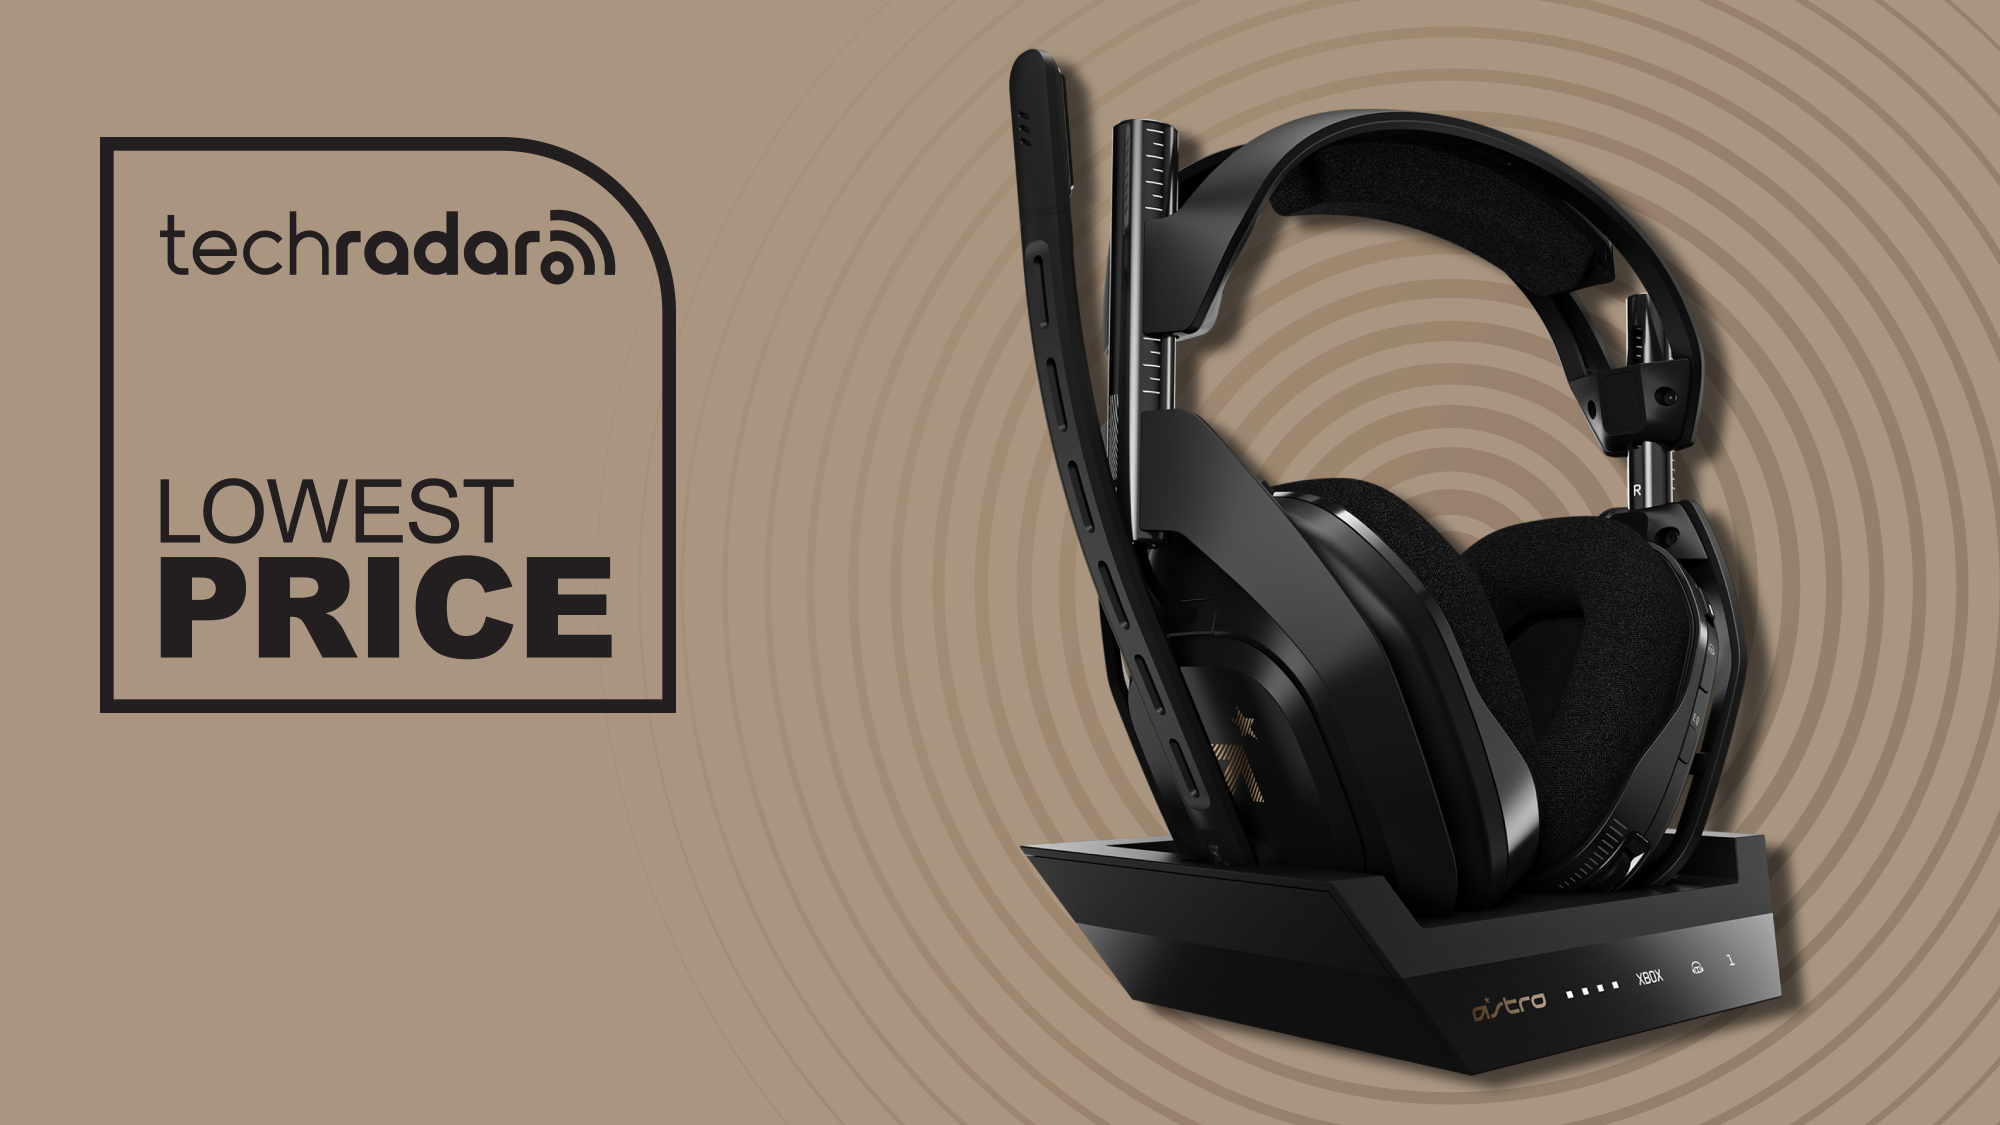 I can't believe just how cheap the super premium Astro A50 gaming headset is at this new lowest-ever price